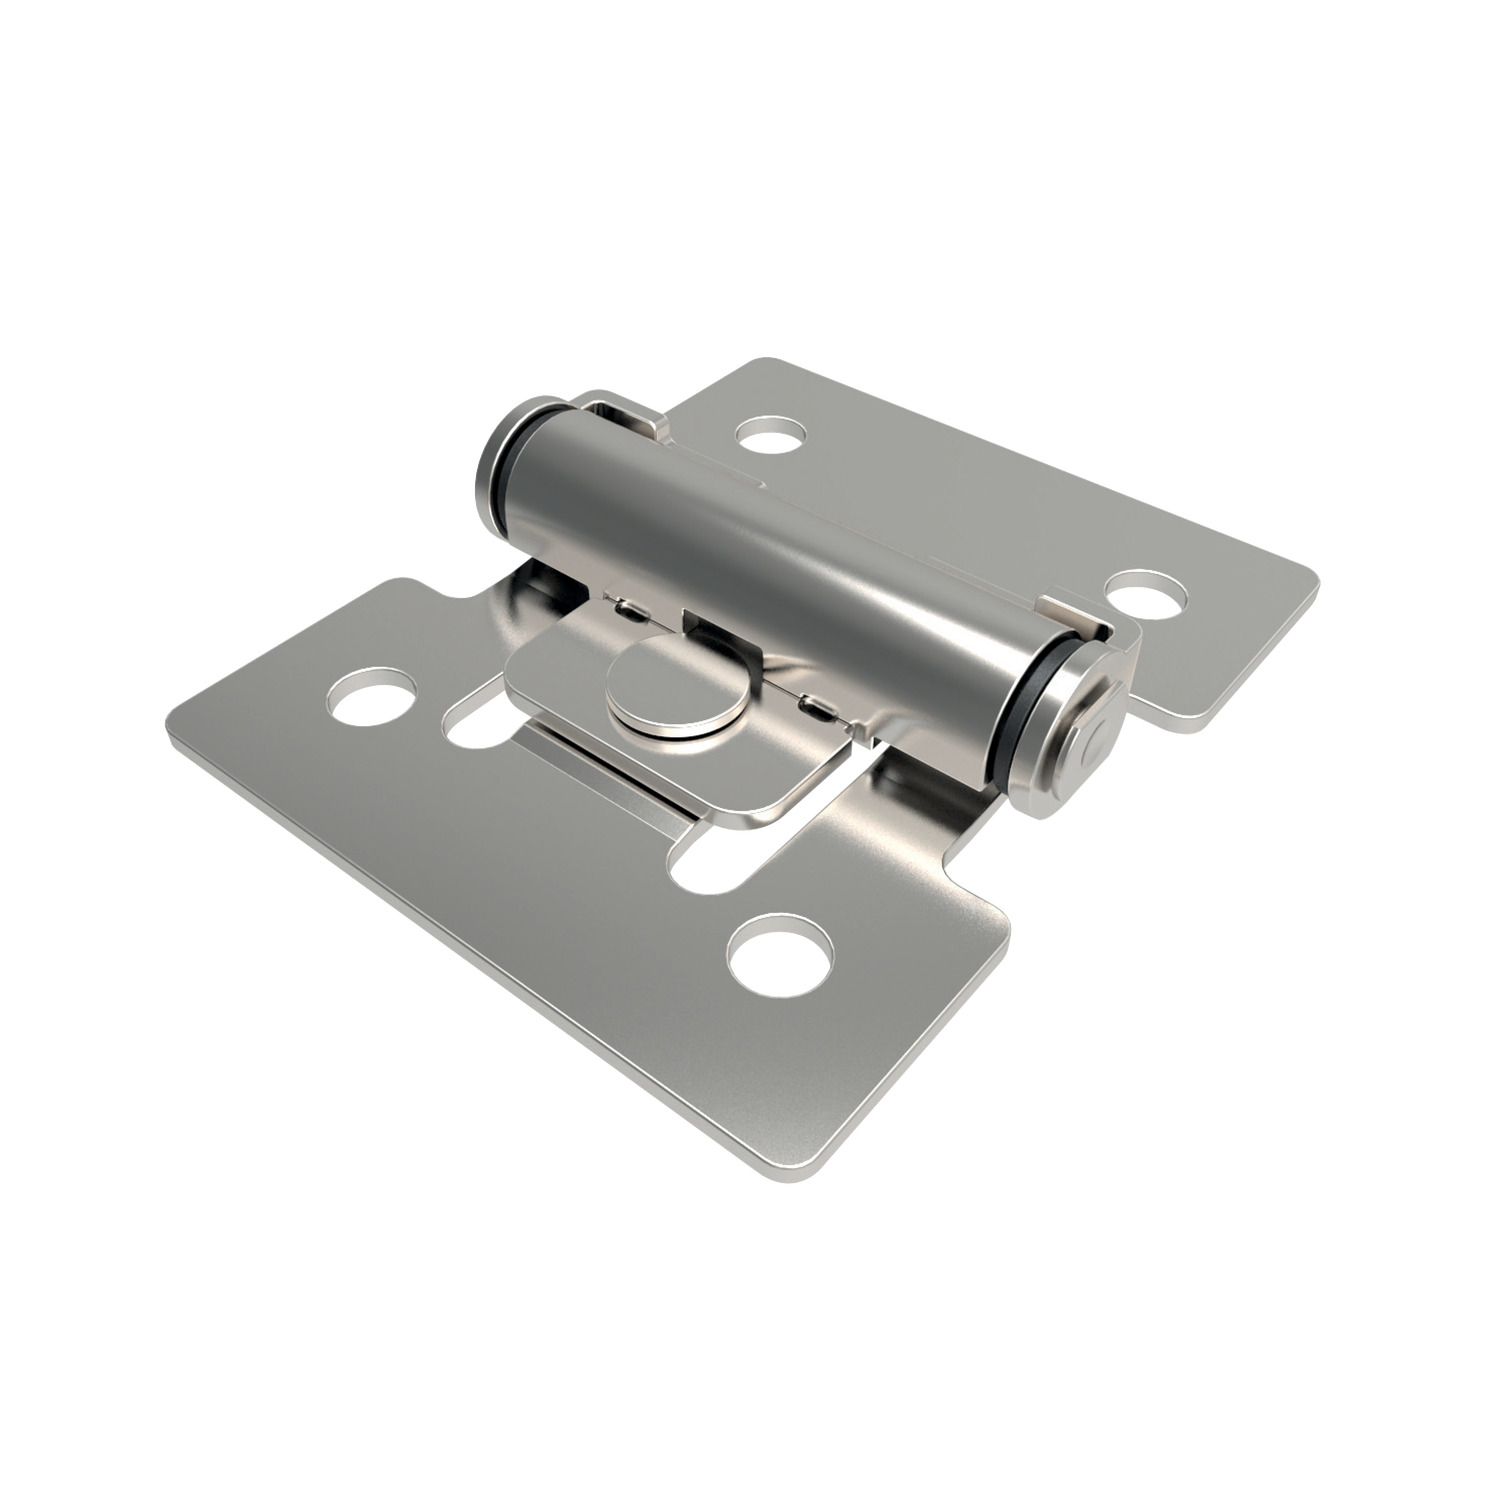 Constant Torque - Friction Torque Hinges Constant torque friction hinges made from stainless steel (AISI 304) with polyacetal fixing tubing. Ideal for holding lids or covers over a free stop angle between 0 - 180°.